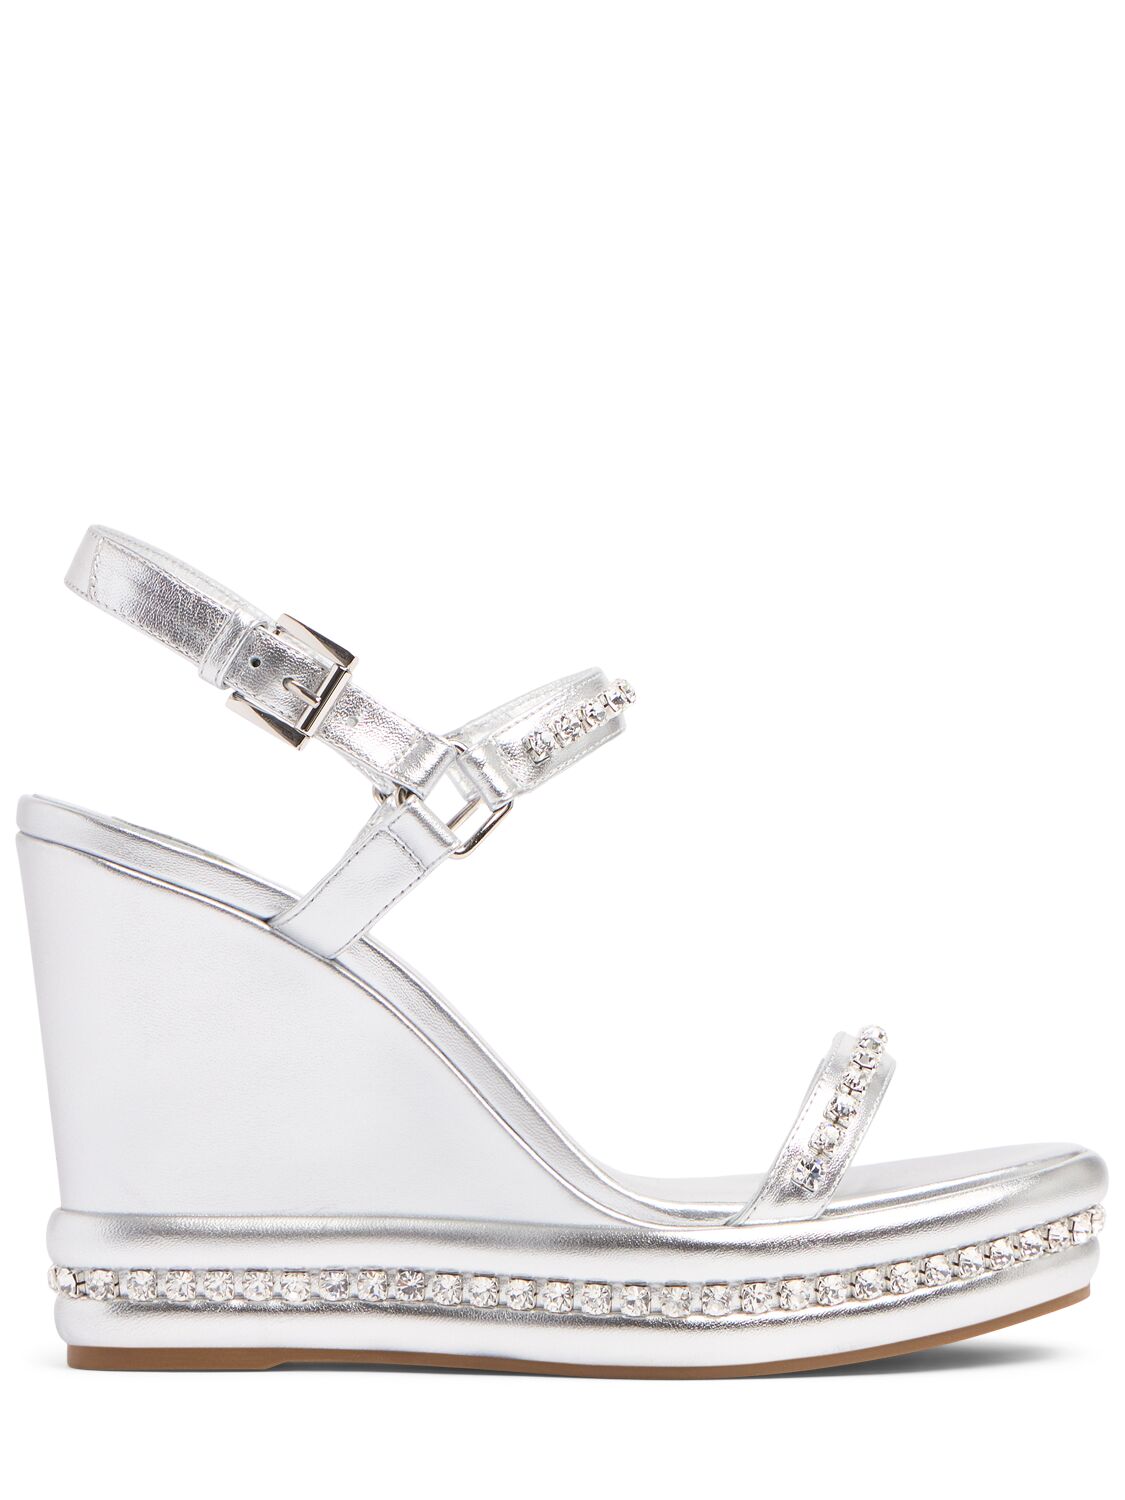 Christian Louboutin 110mm Pyrastrass Leather Wedges In Gray